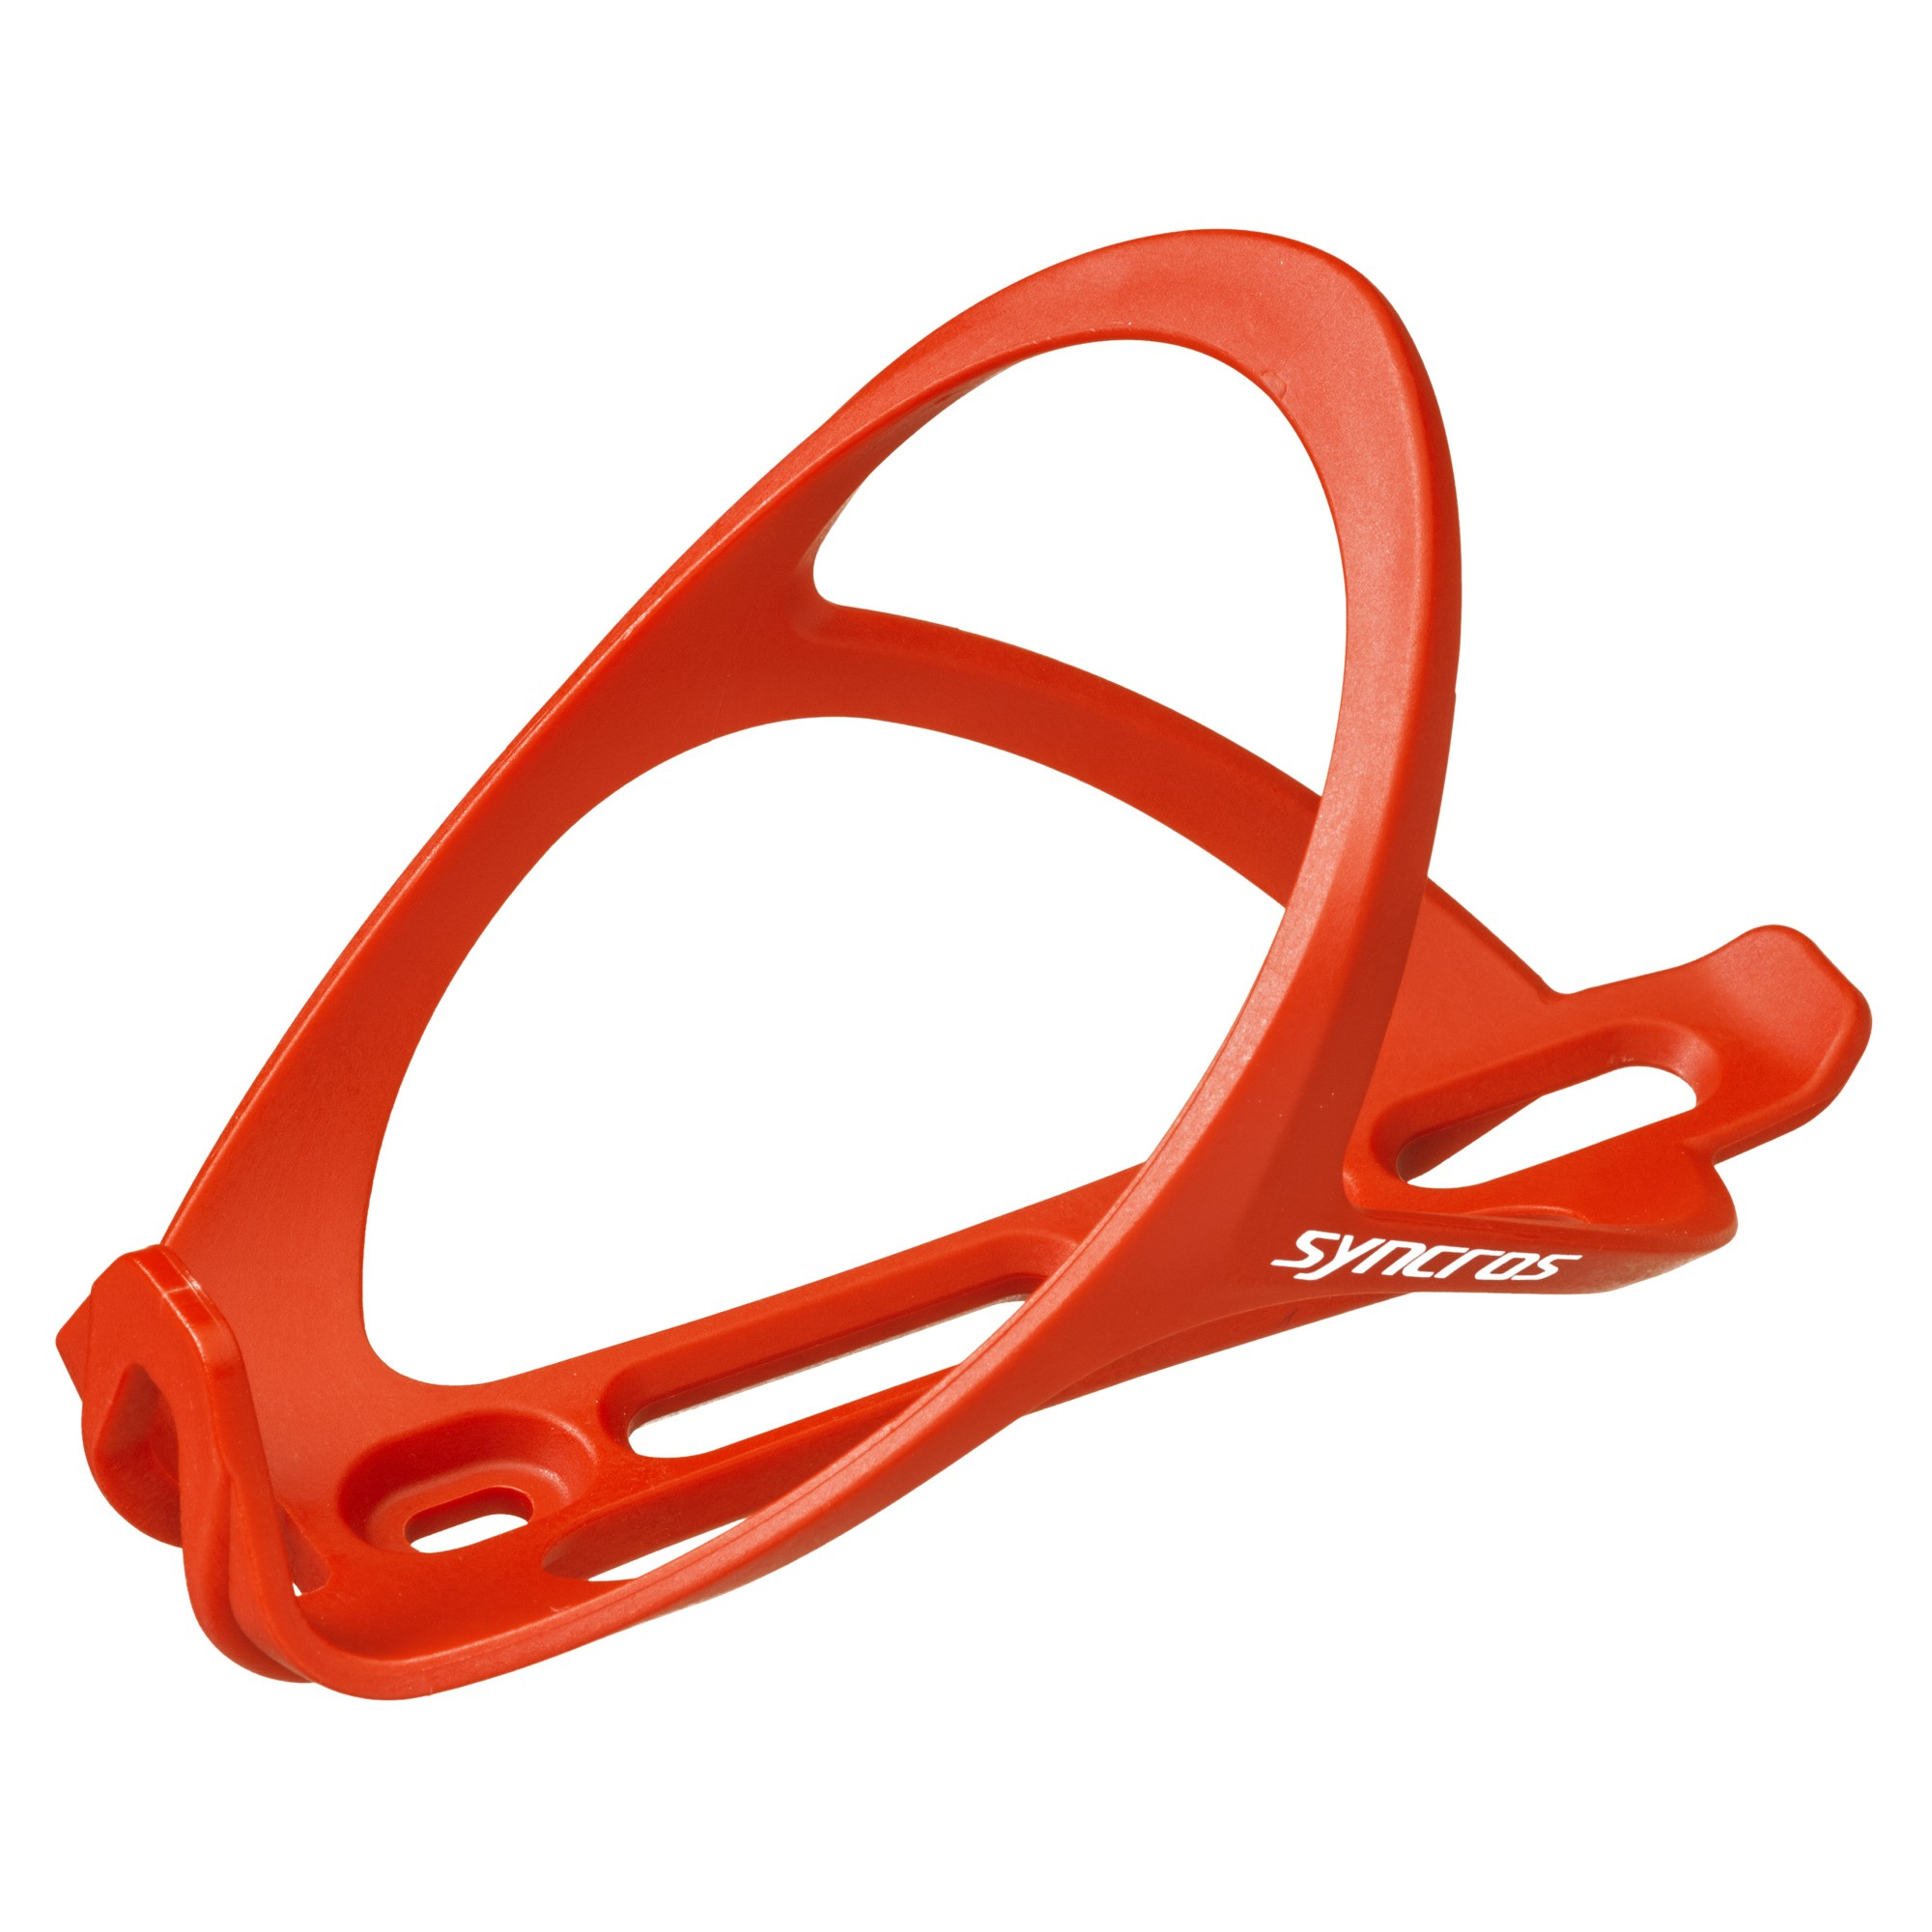 SYNCROS Bottle Cage Nylon SBC-02 One Size Red (272900 )